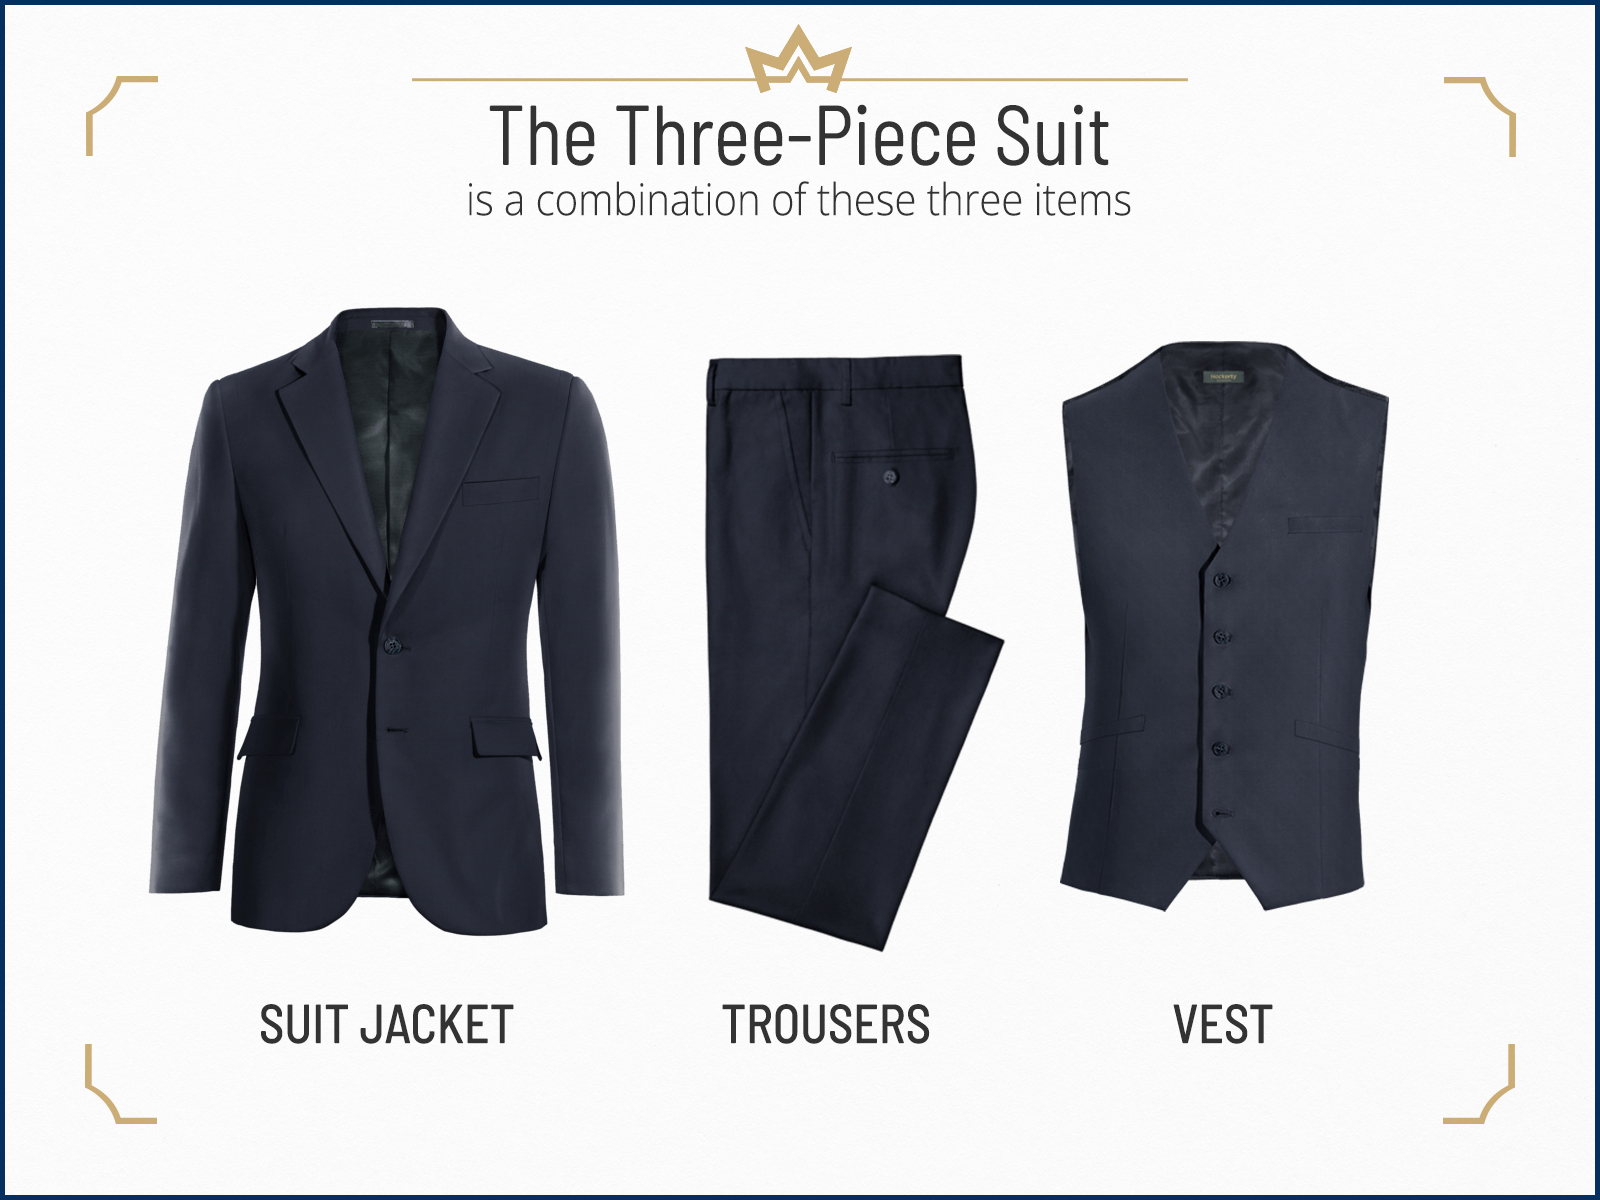 Three-piece suit parts by definition: the jacket, pants, and vest